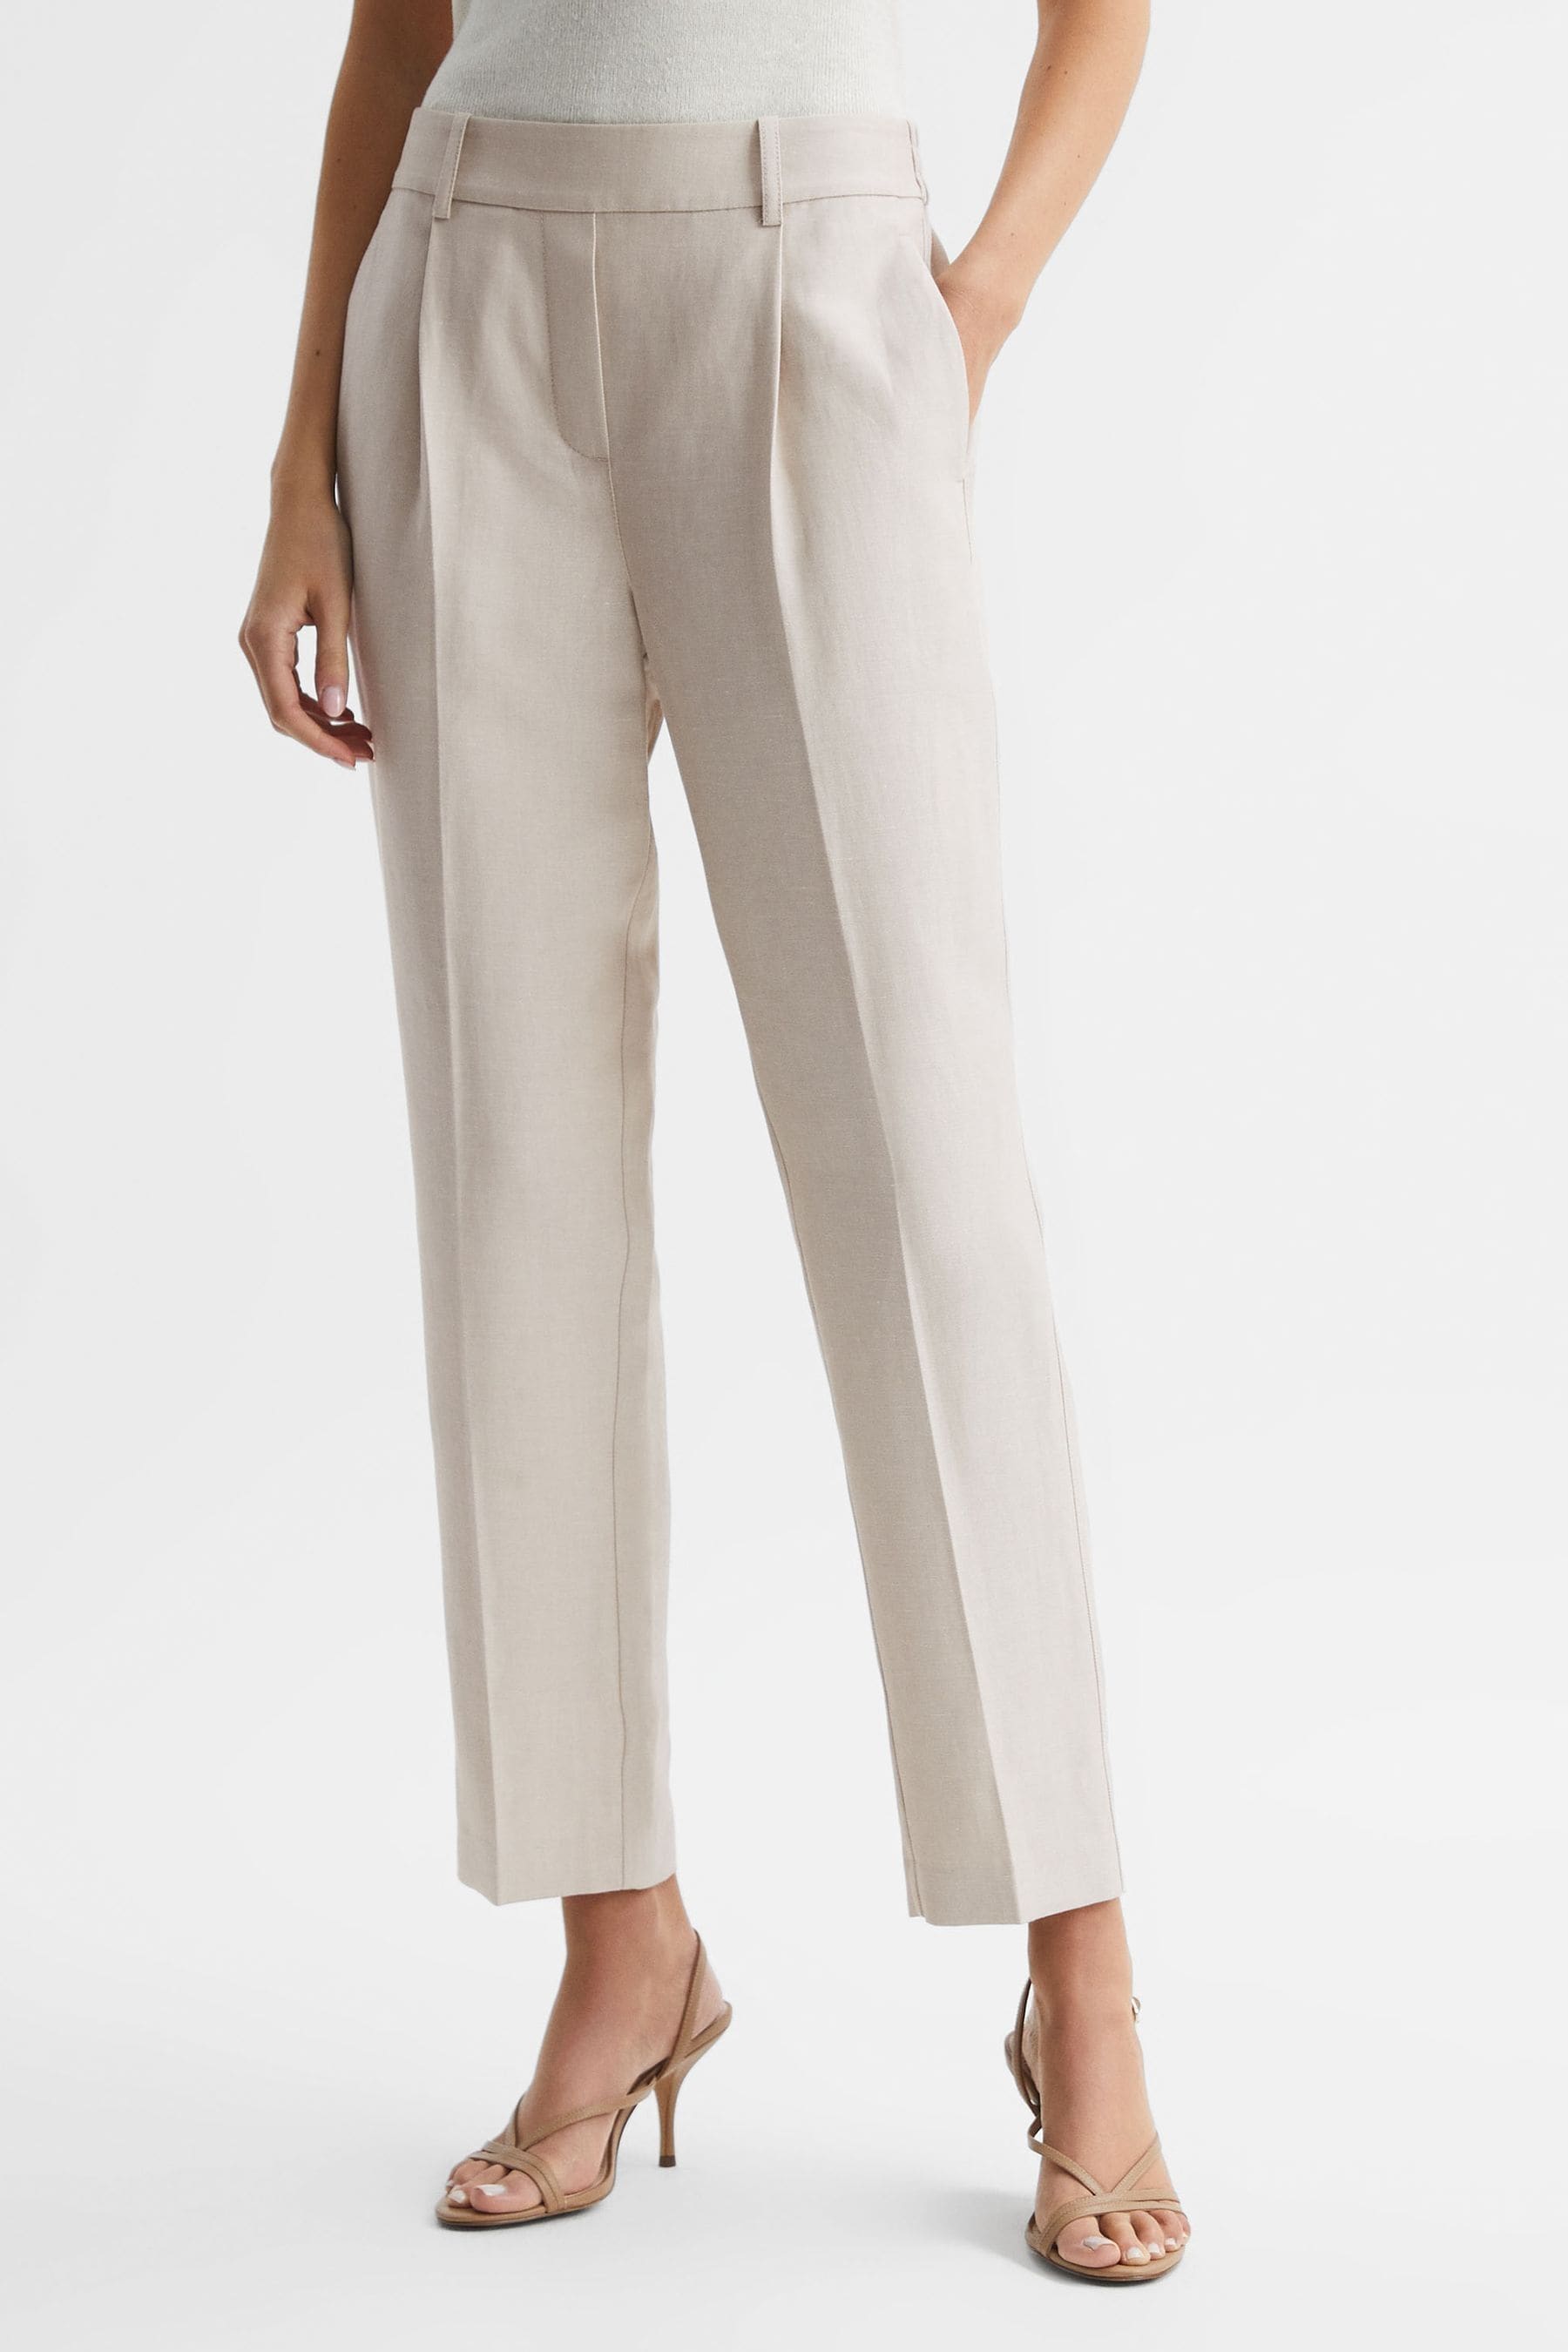 Reiss Shae Tapered Leg Linen Trousers In Oatmeal